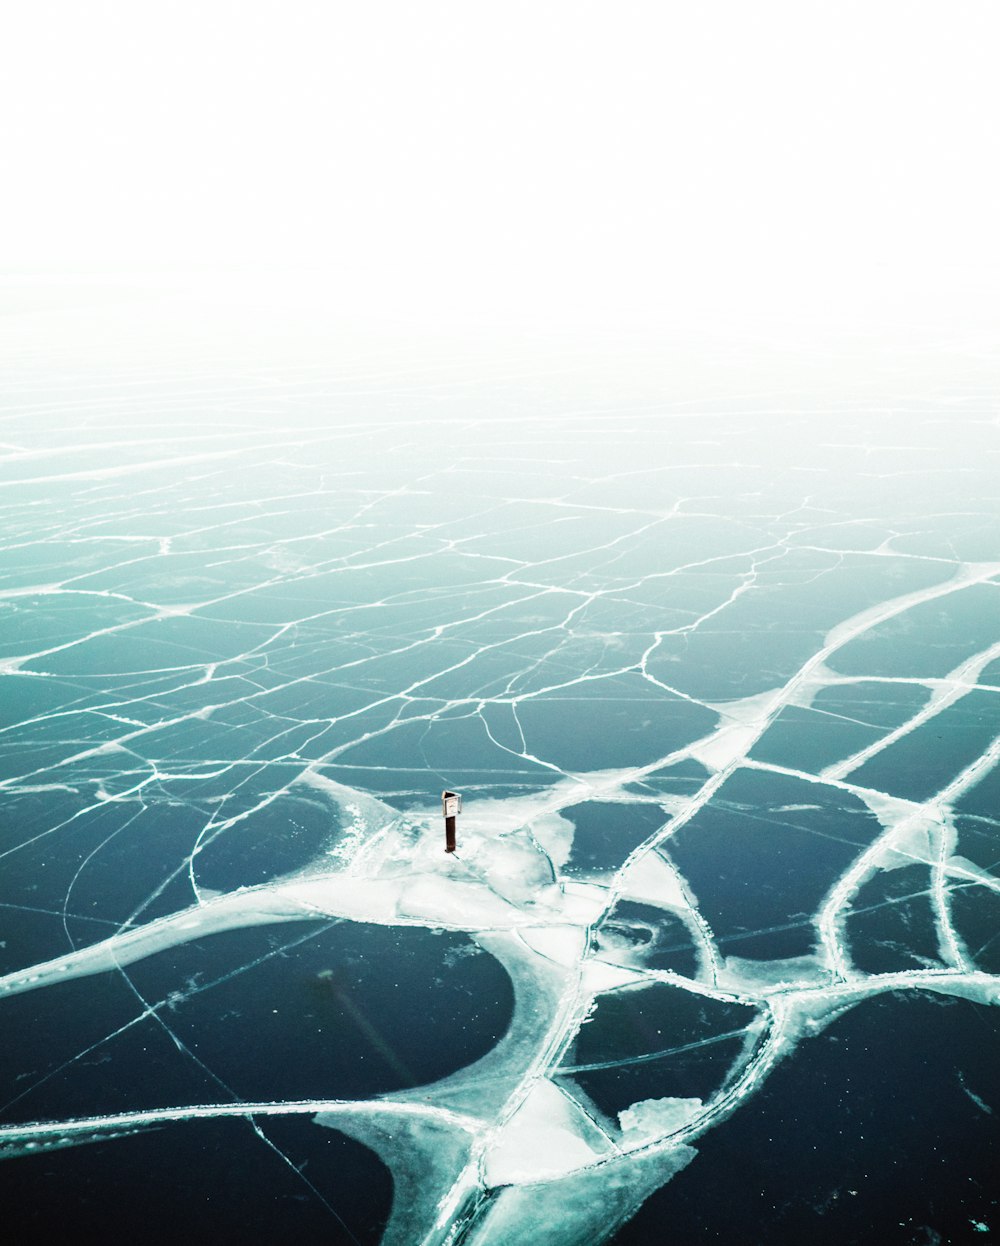 person standing on ice